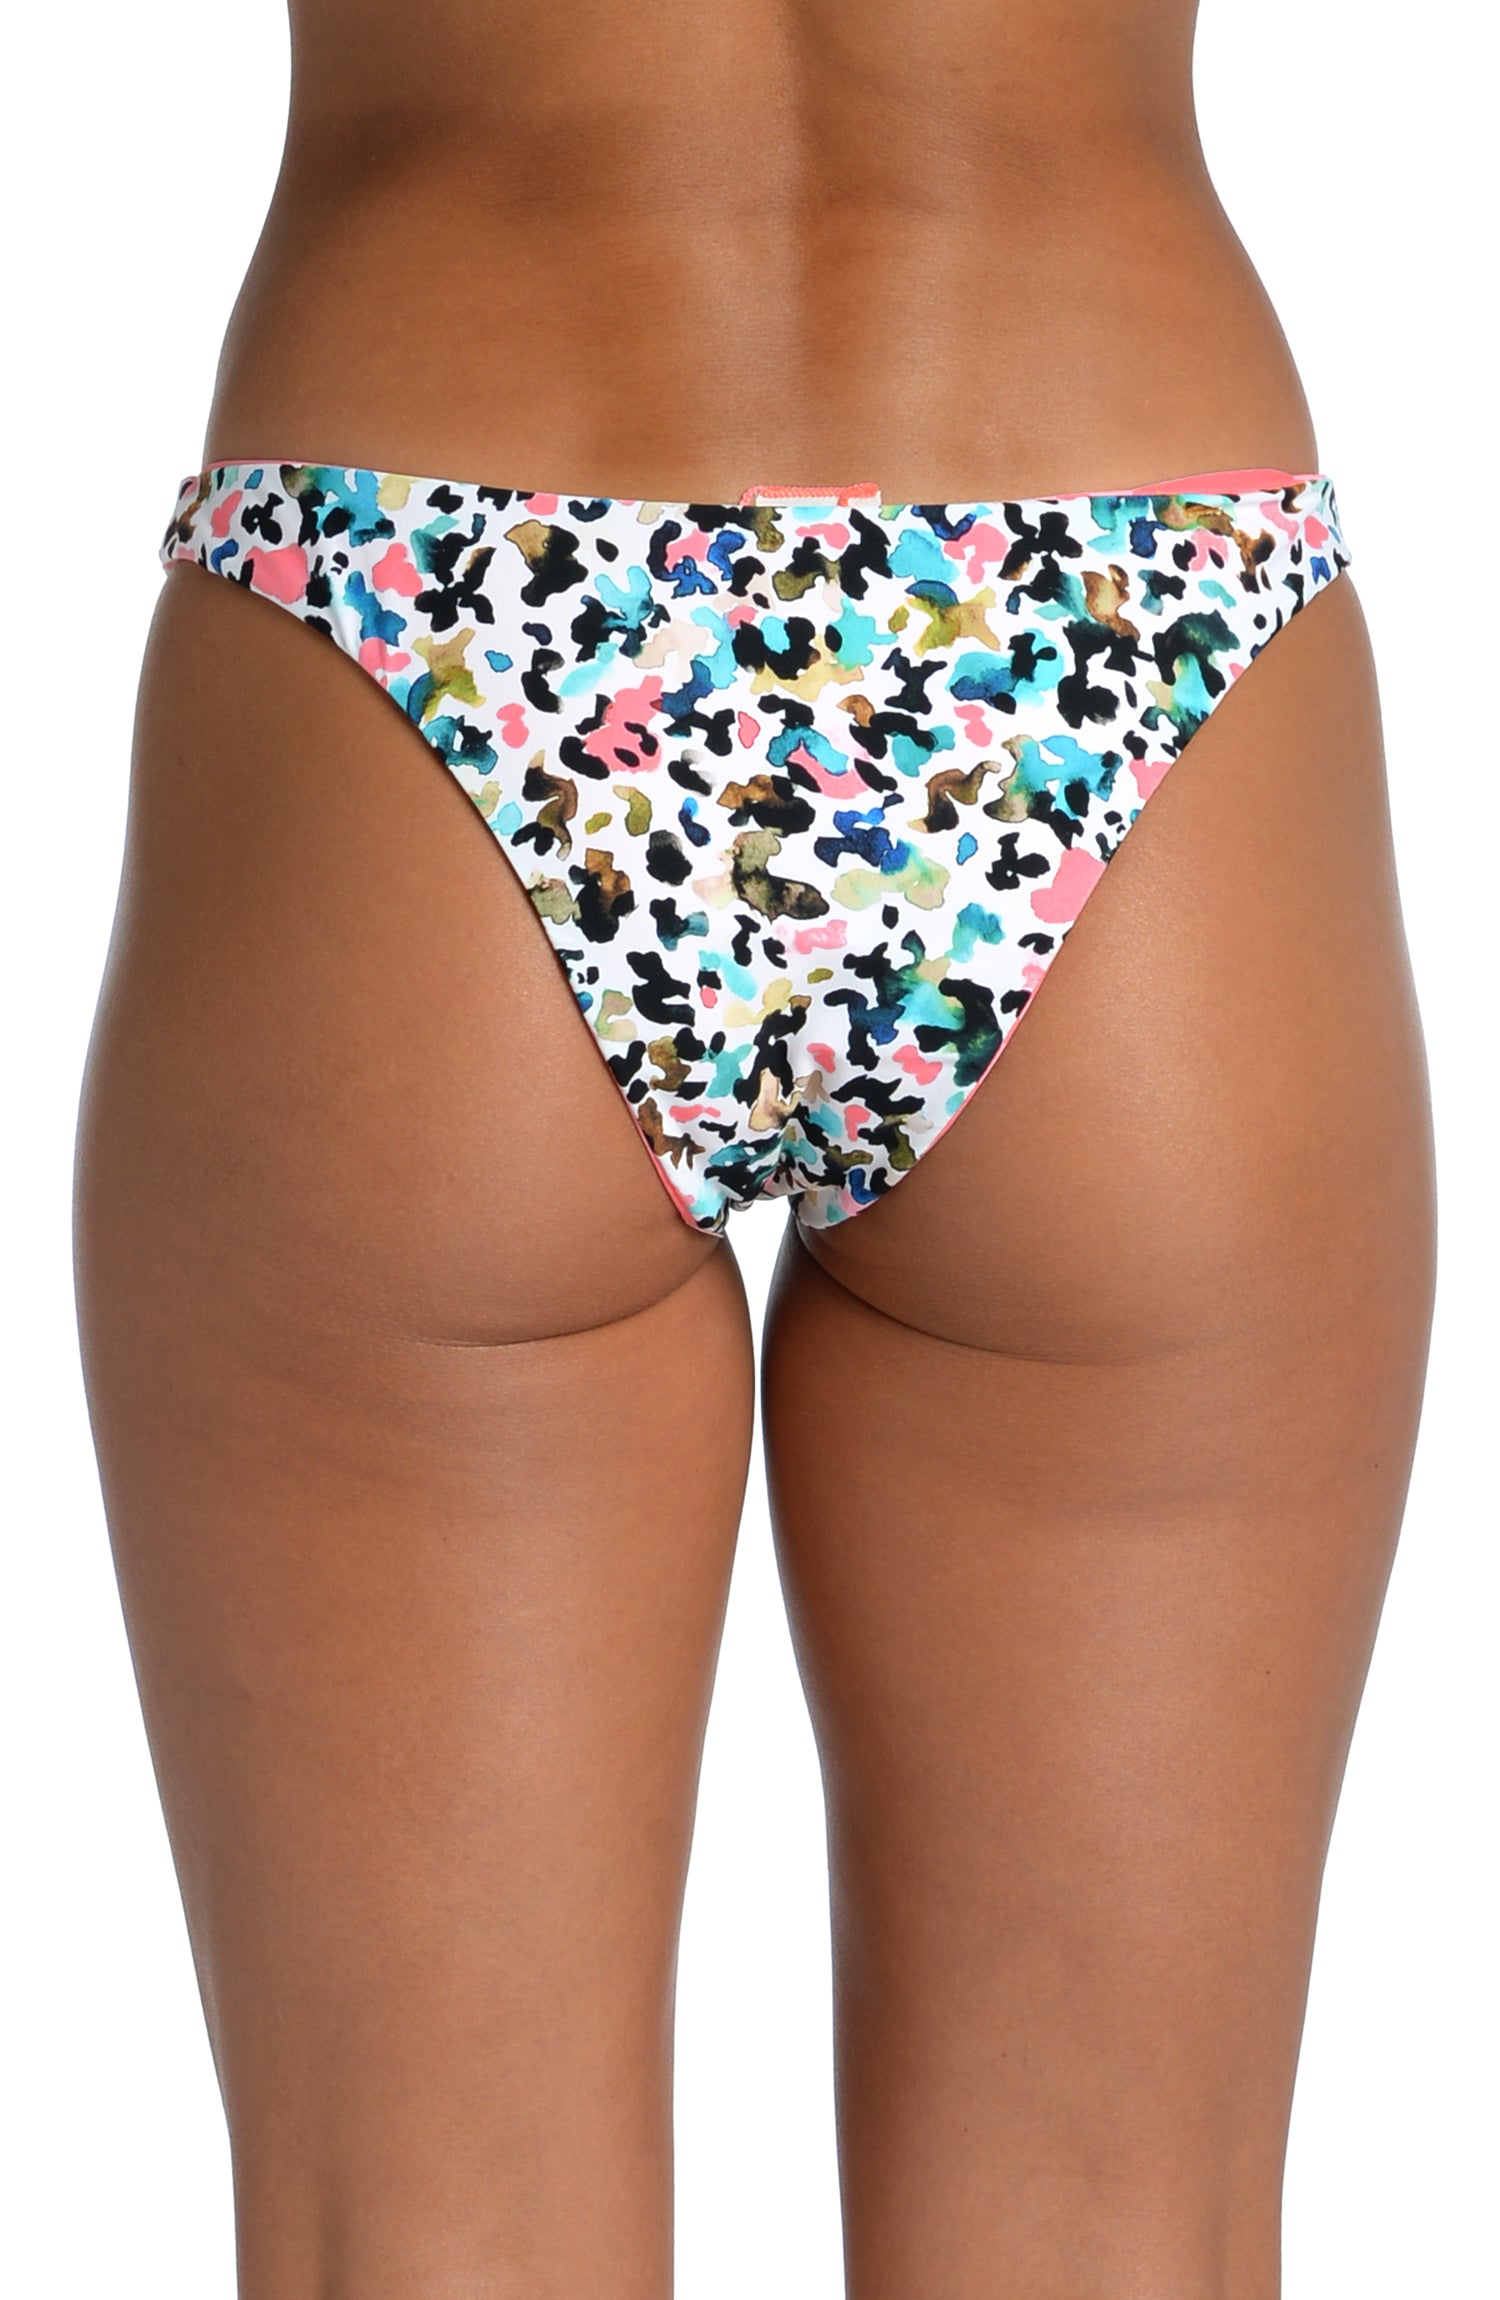 Model is wearing a multi colored confetti camouflage printed cheeky hipster bottom from our Camo Cheetah collection!